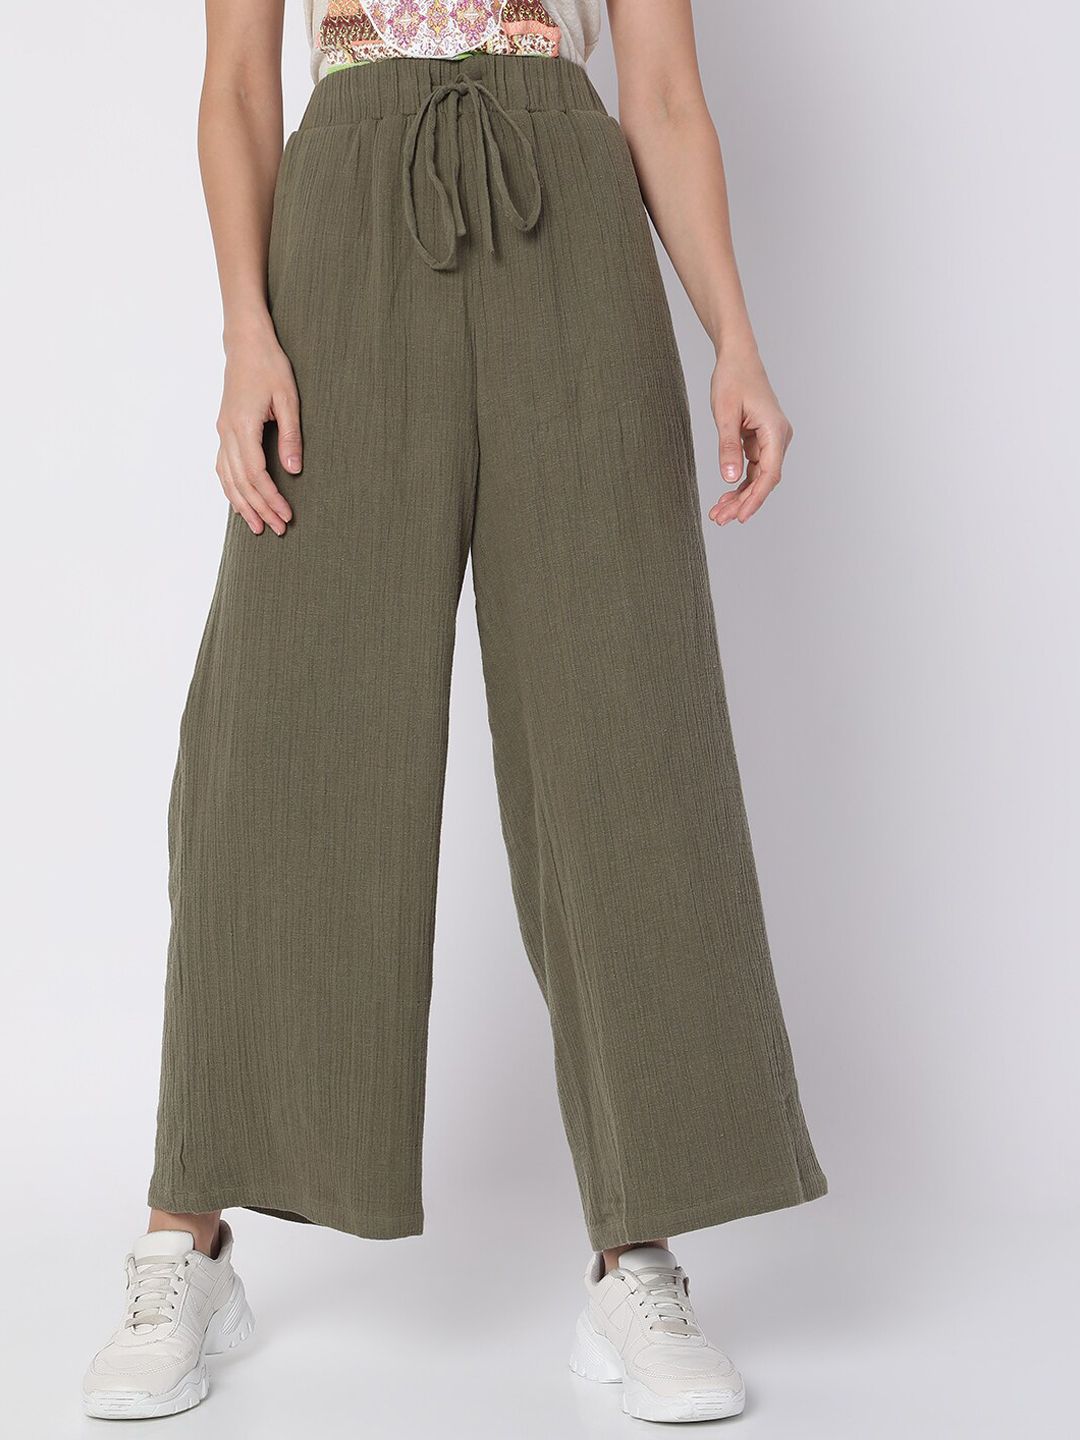 Vero Moda Women Olive Green Flared High-Rise Trousers Price in India